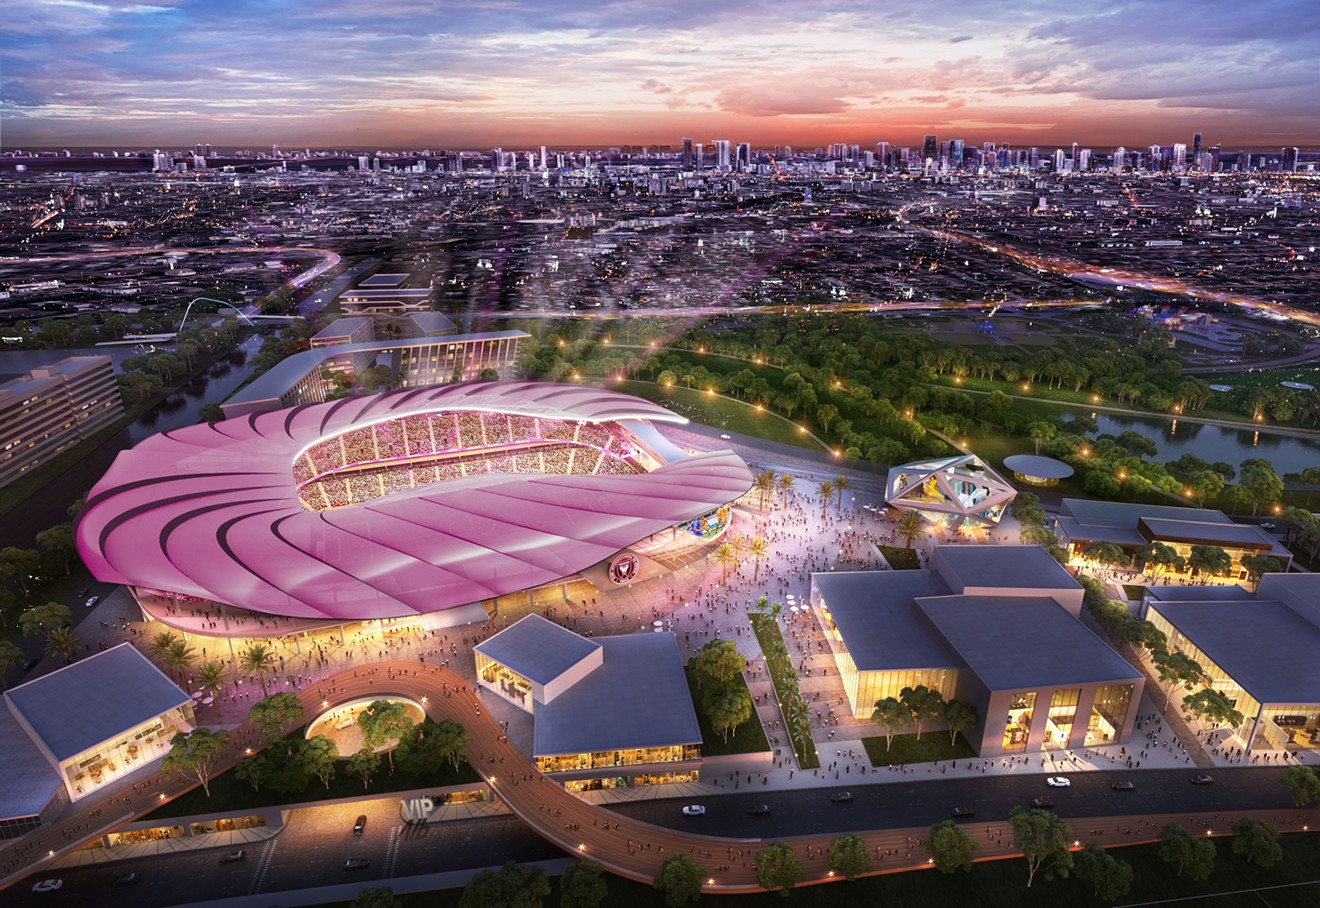 Inter Miami will want a big name to put butts in the seats of Miami Freedom Park whenever it opens. Could that marquee star be Lionel Messi or Cristiano Ronaldo?